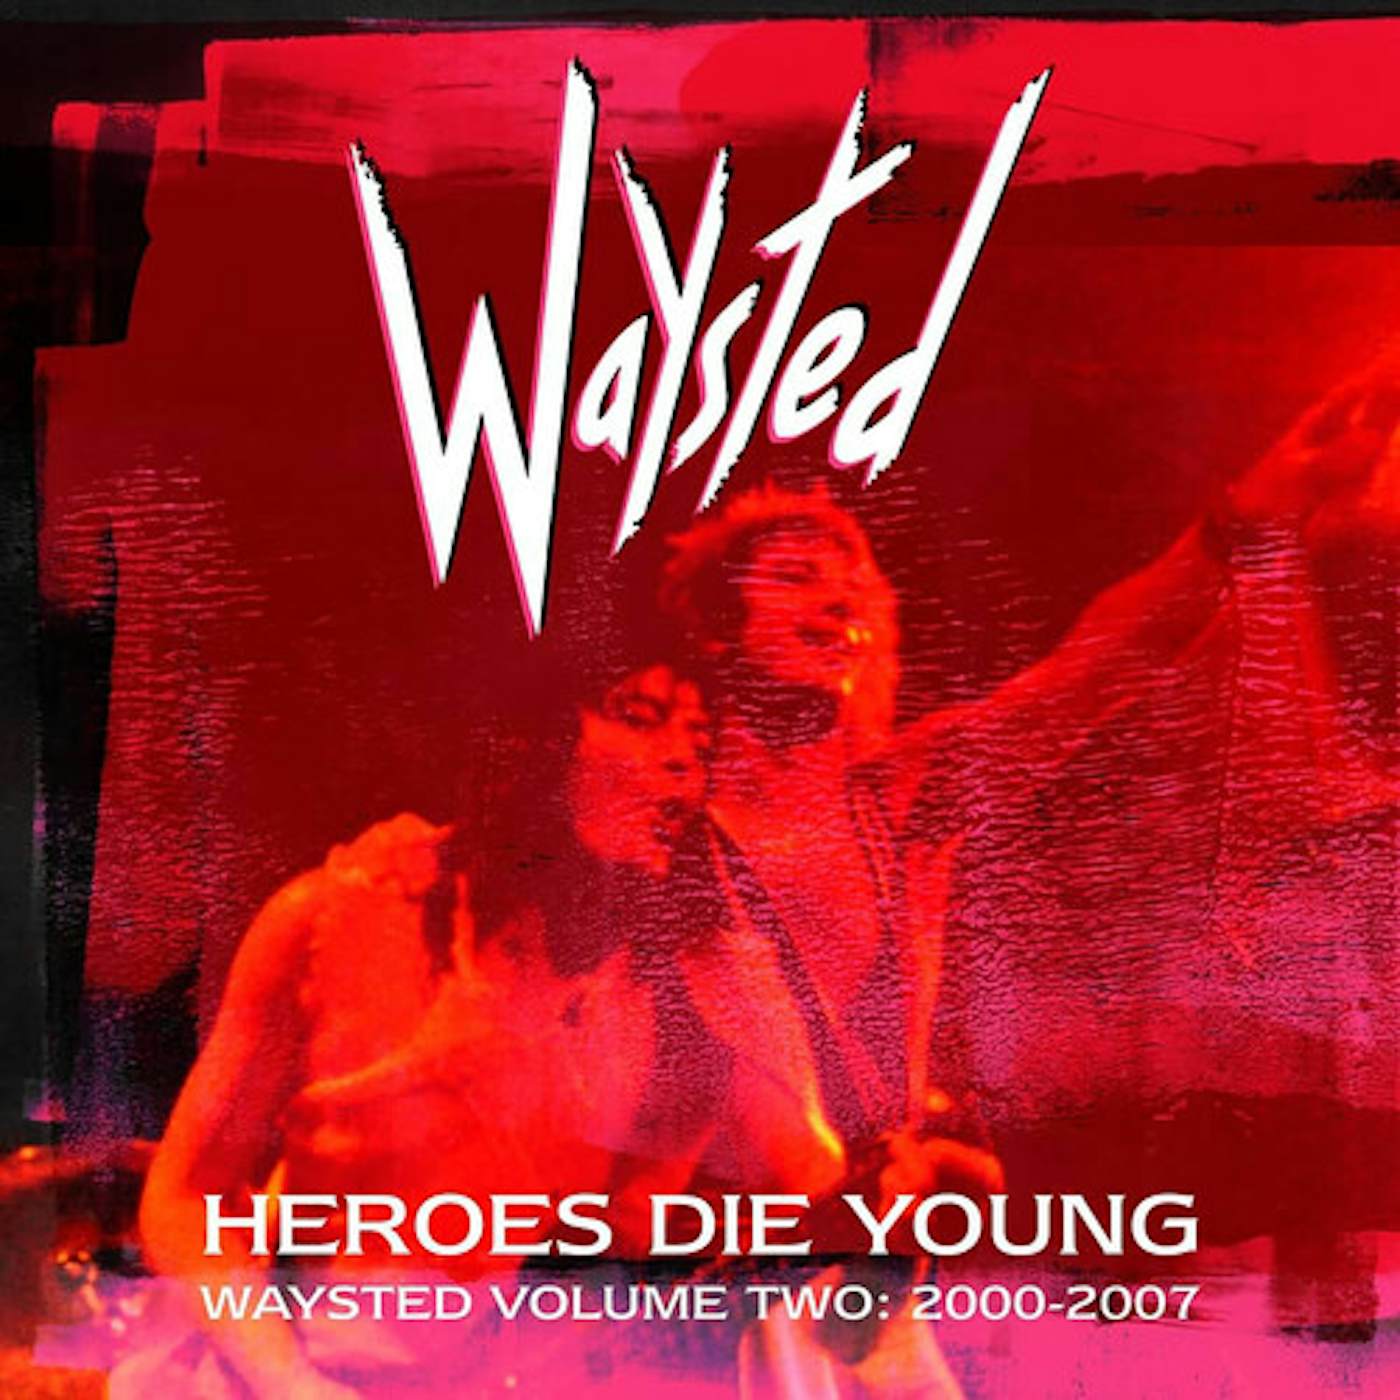 HEROES DIE YOUNG: WAYSTED VOLUME TWO (2000-2007) CD